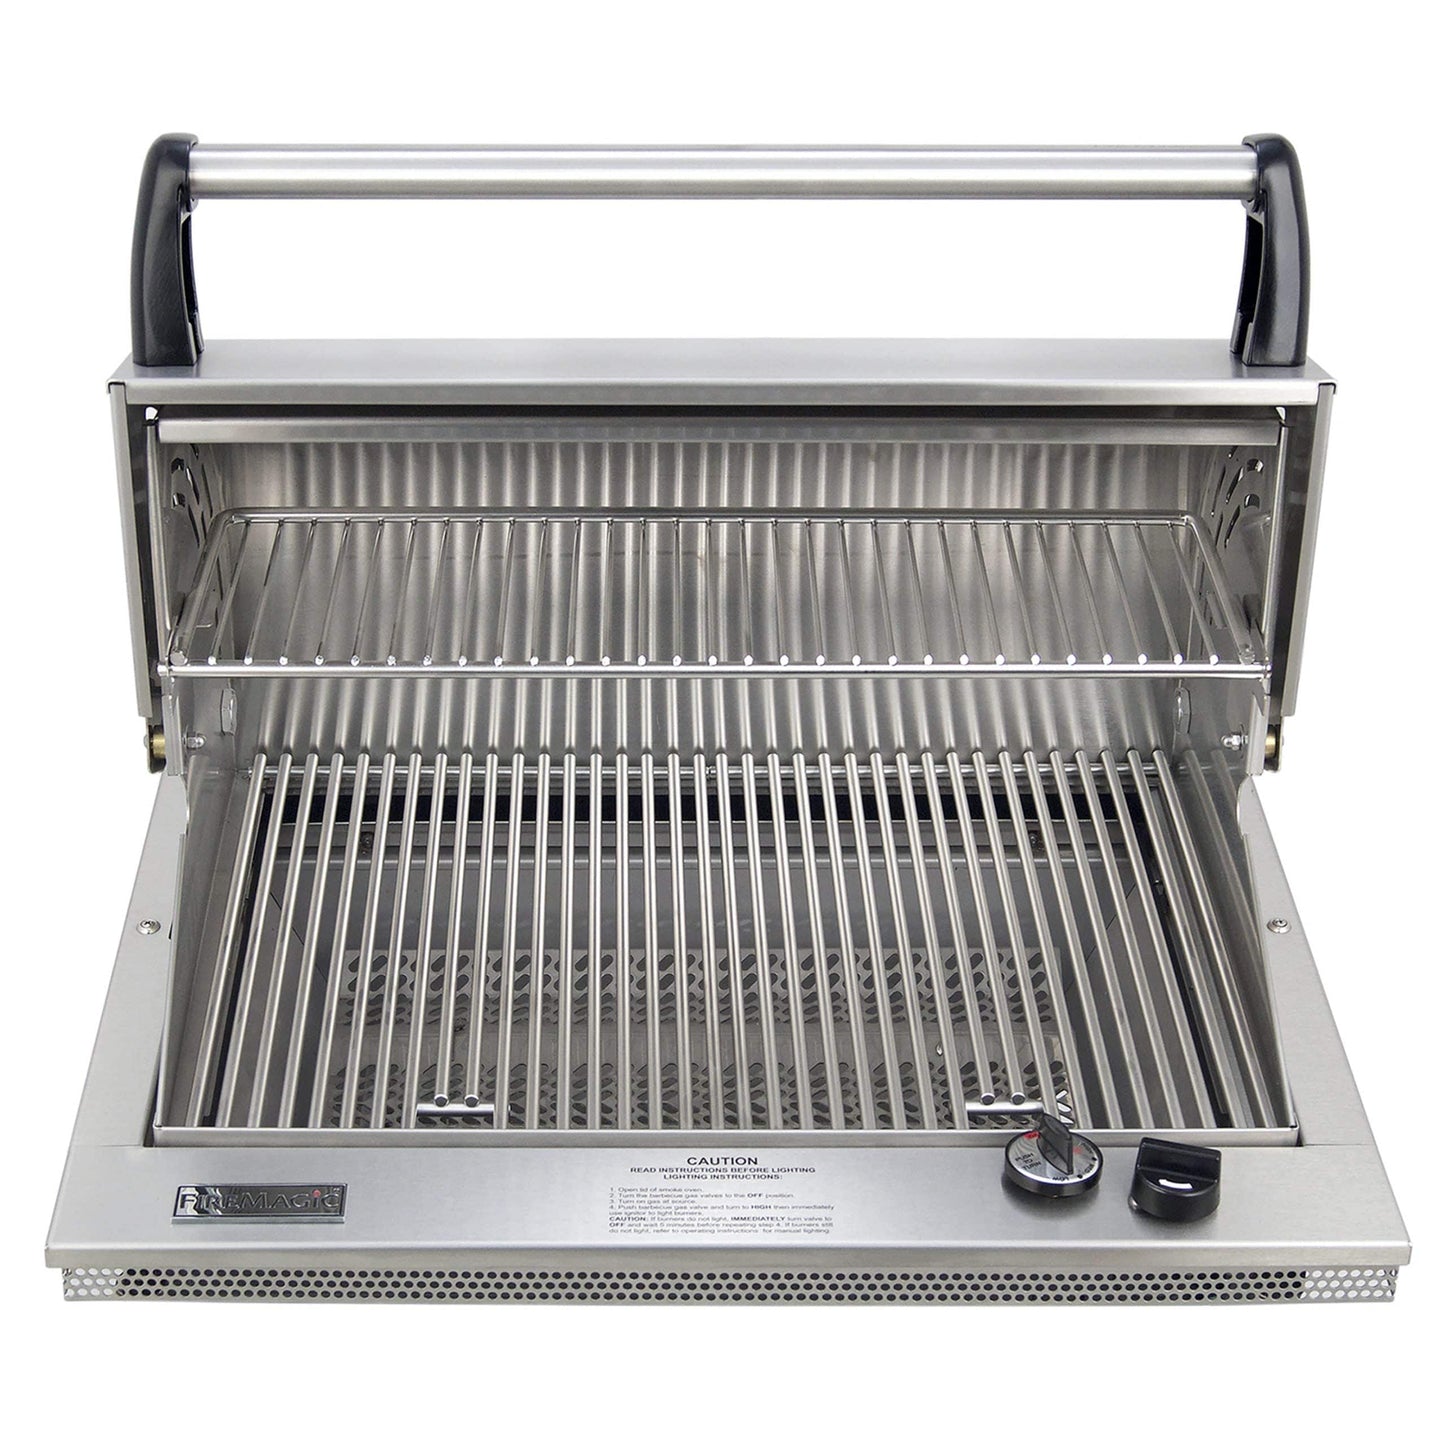 Fire Magic Deluxe Classic Drop-In Grill 24"